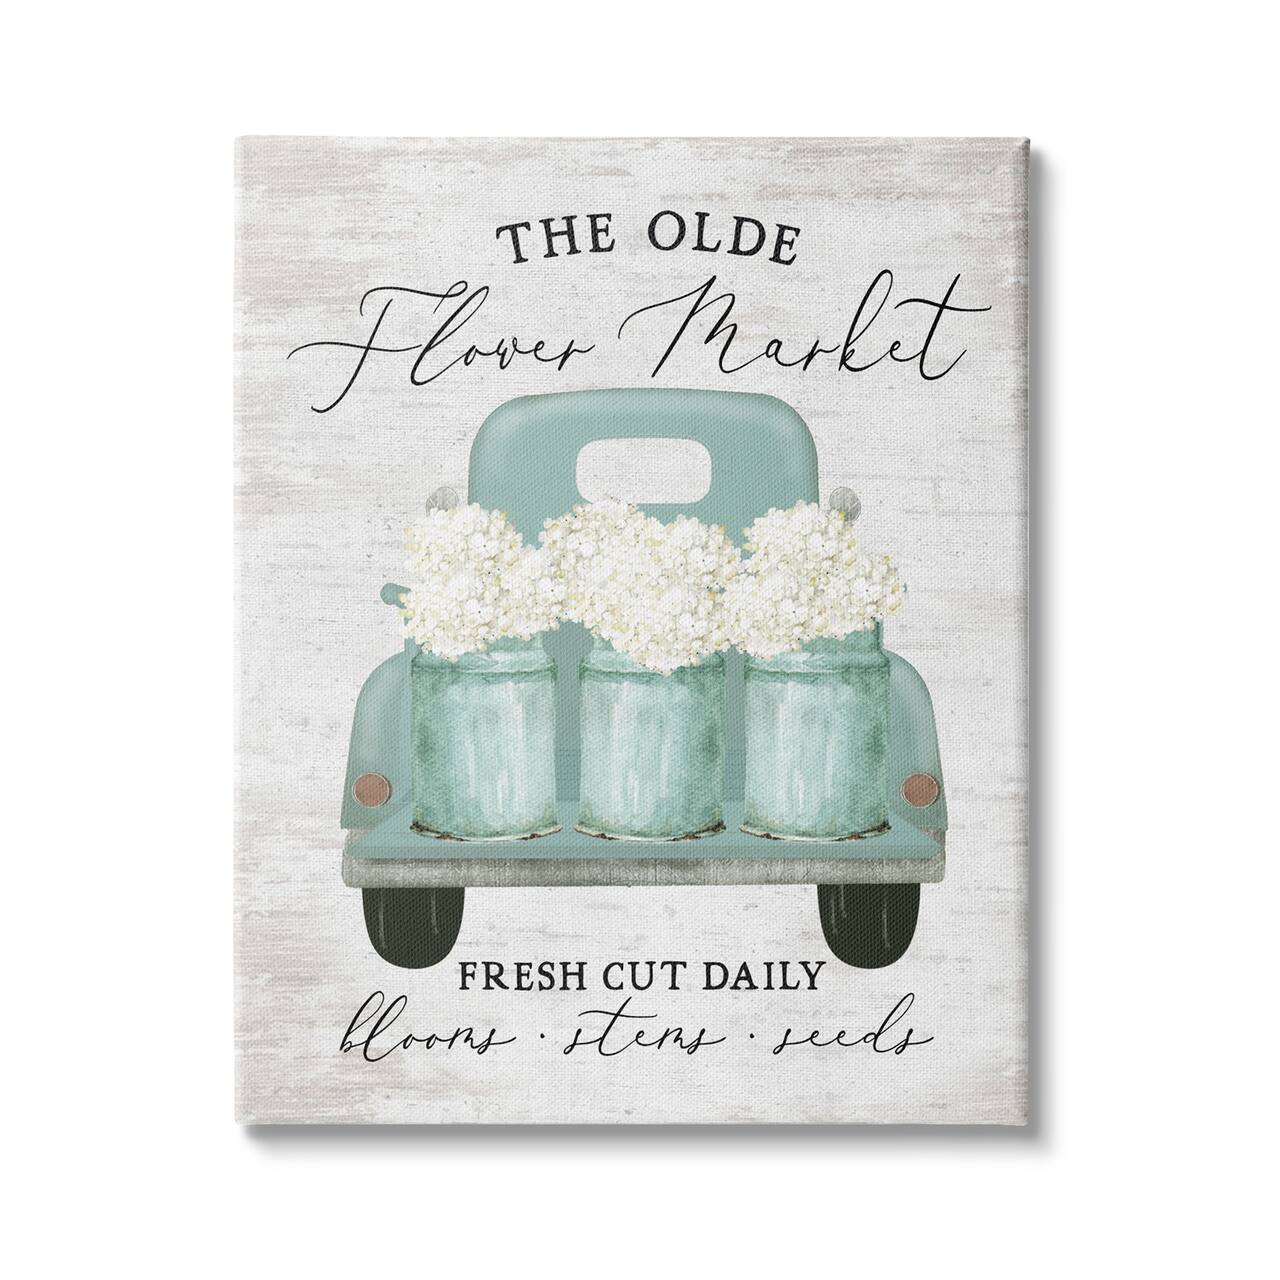 Stupell Industries Olde Farmer Market Vintage Turquoise Truck White Florals Canvas Wall Art